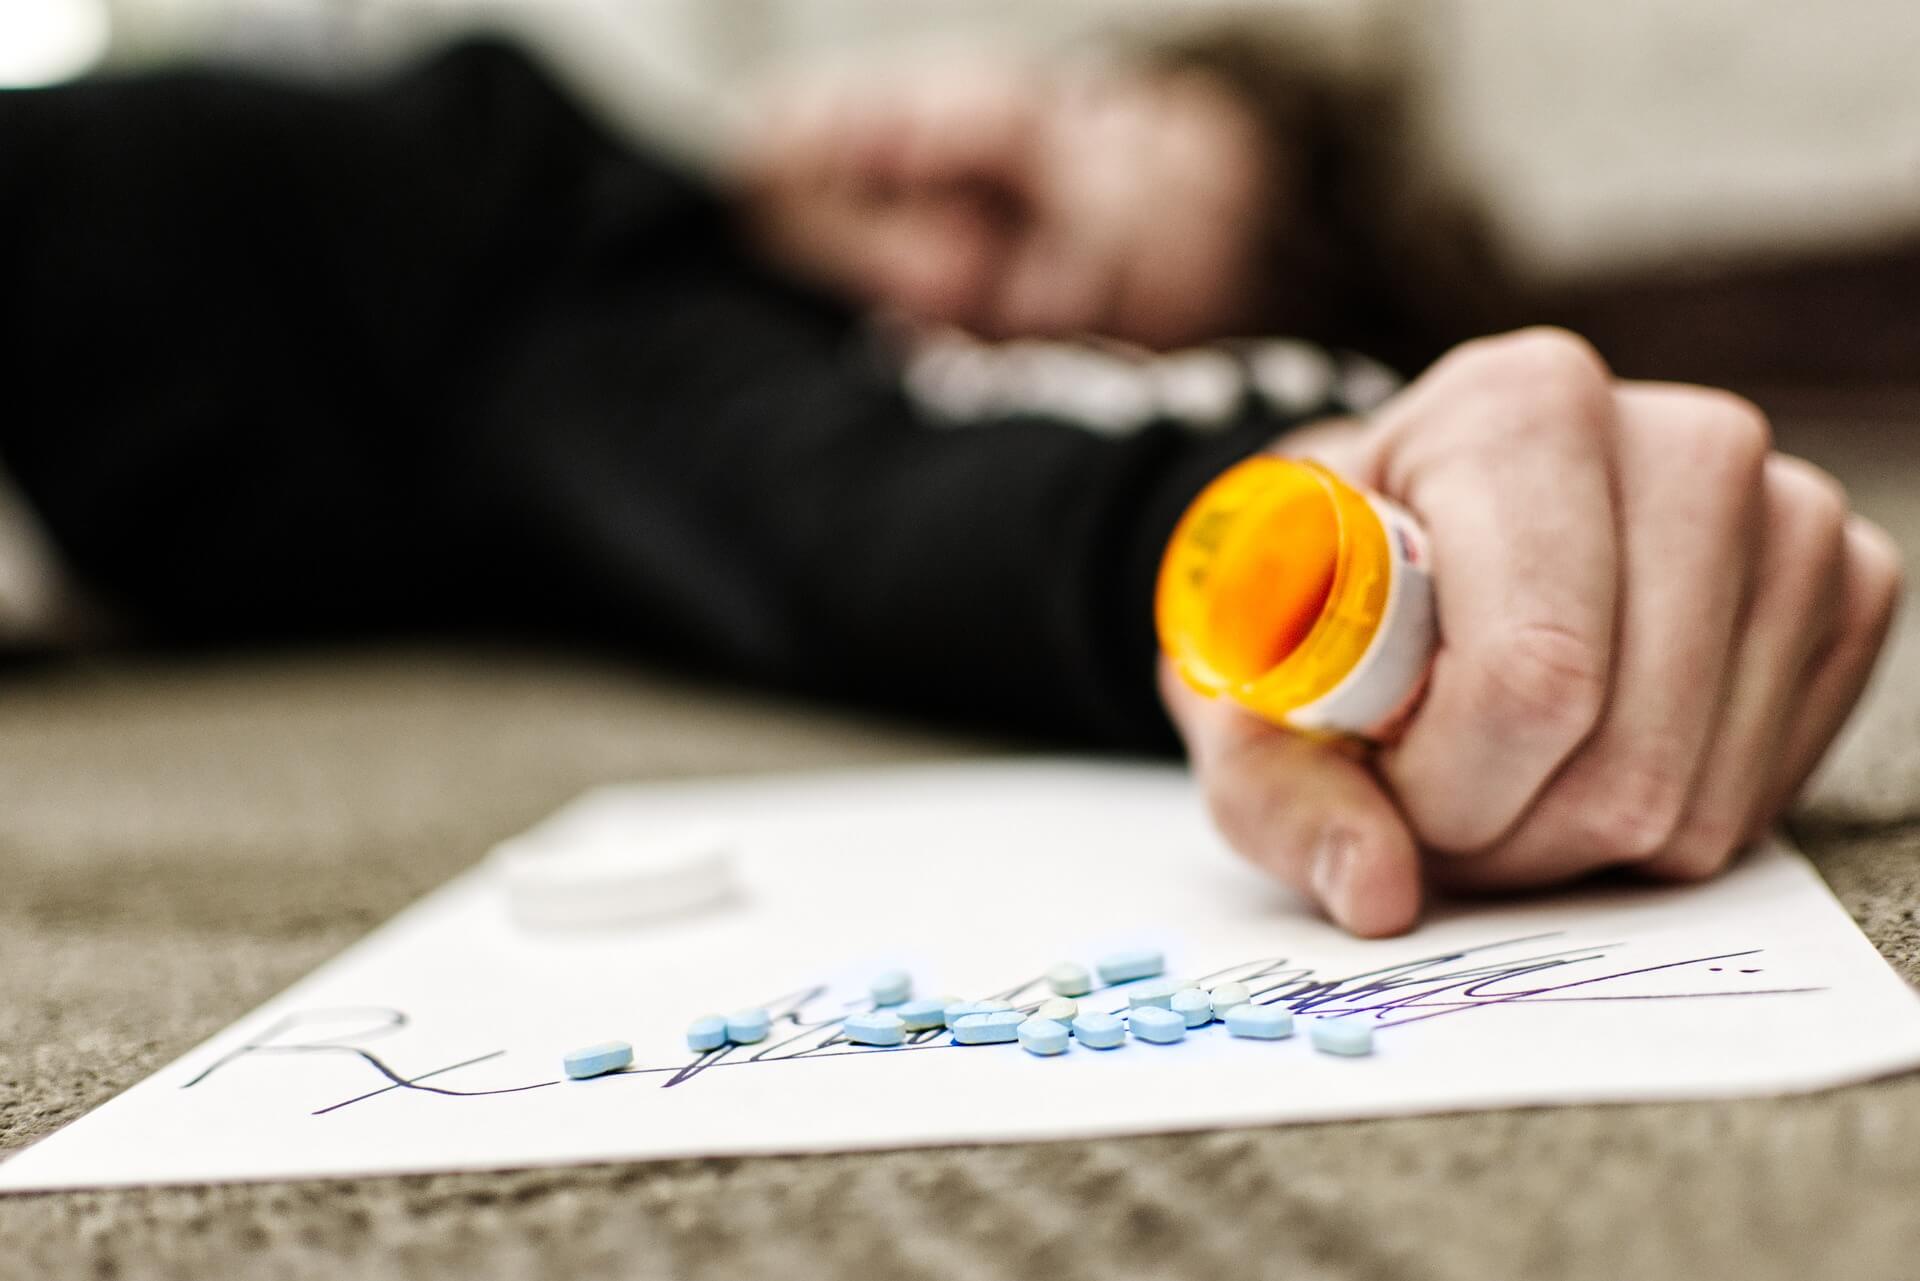 How Do People Become Addicted to Painkillers?